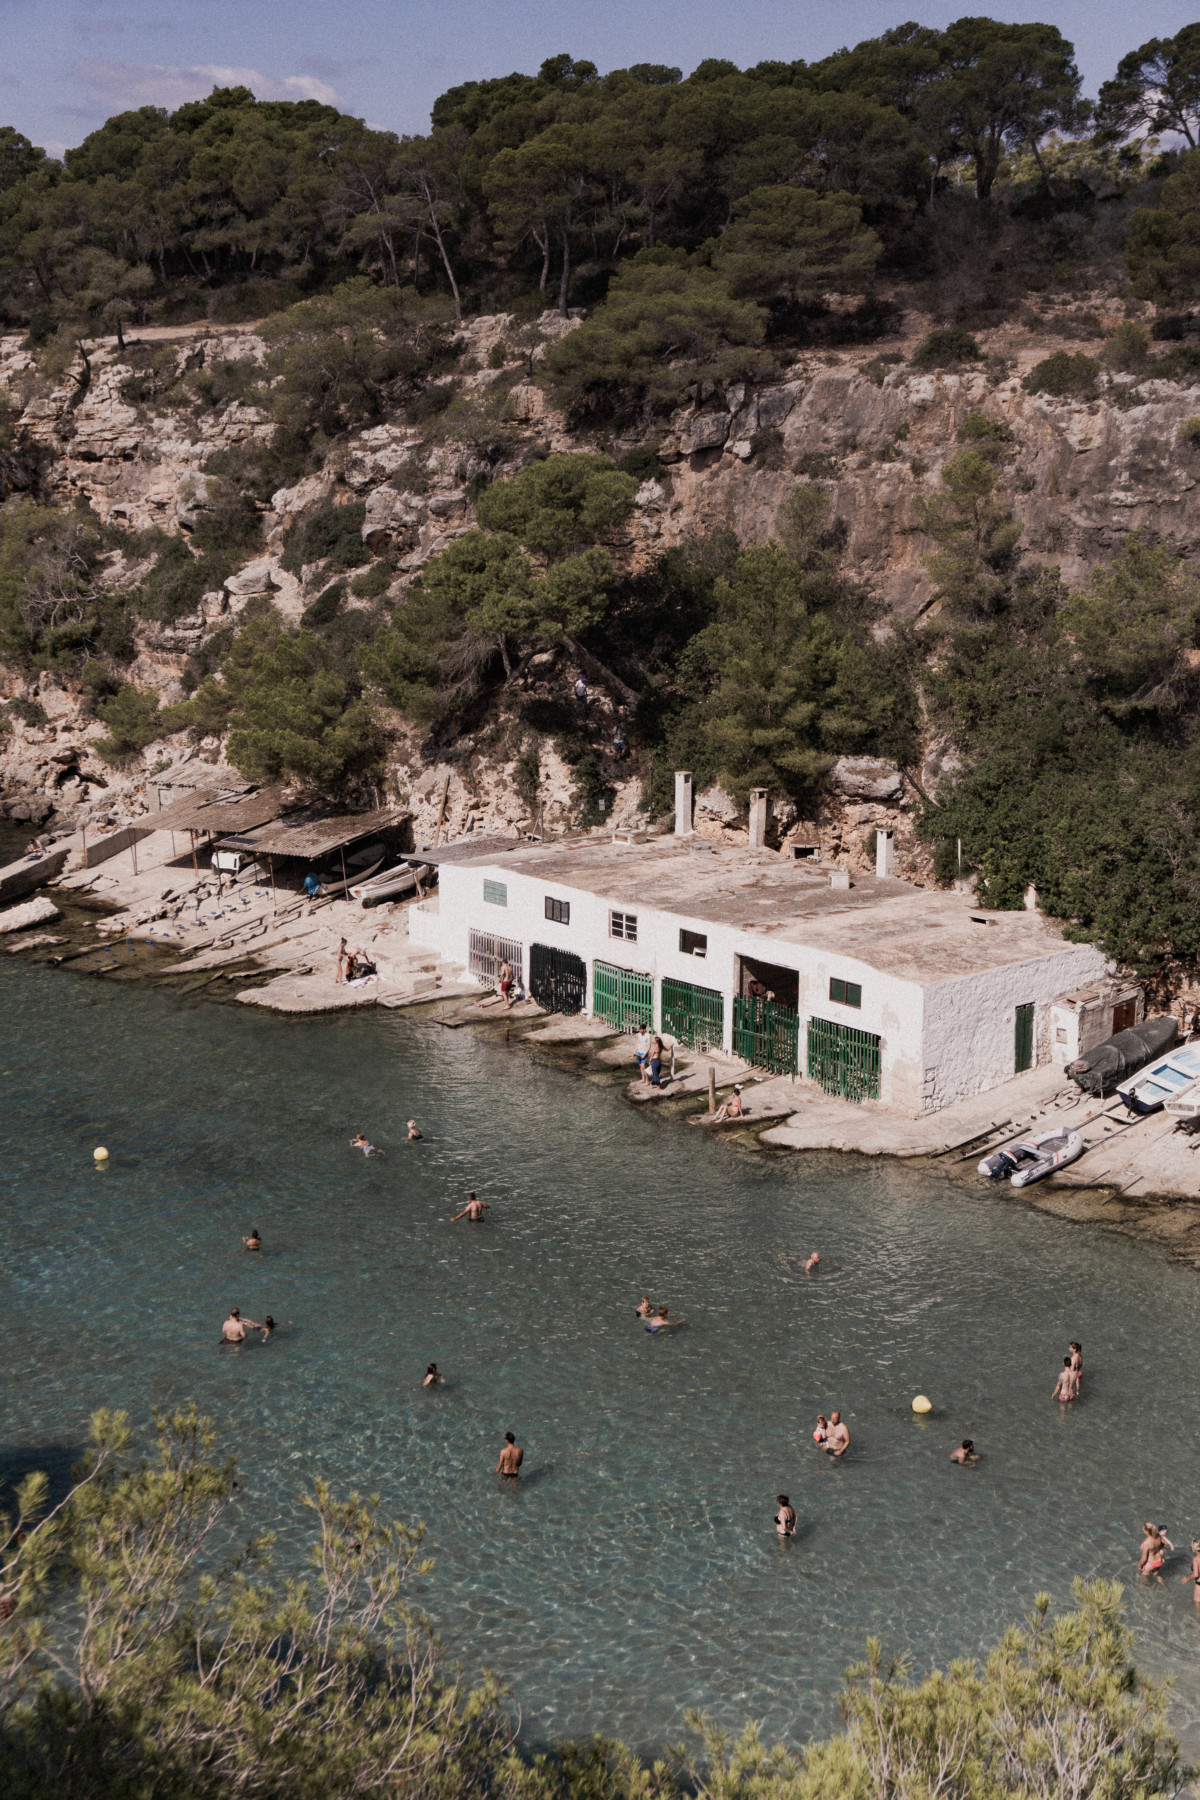 Looking down onto the white boathouses at Cala Pi